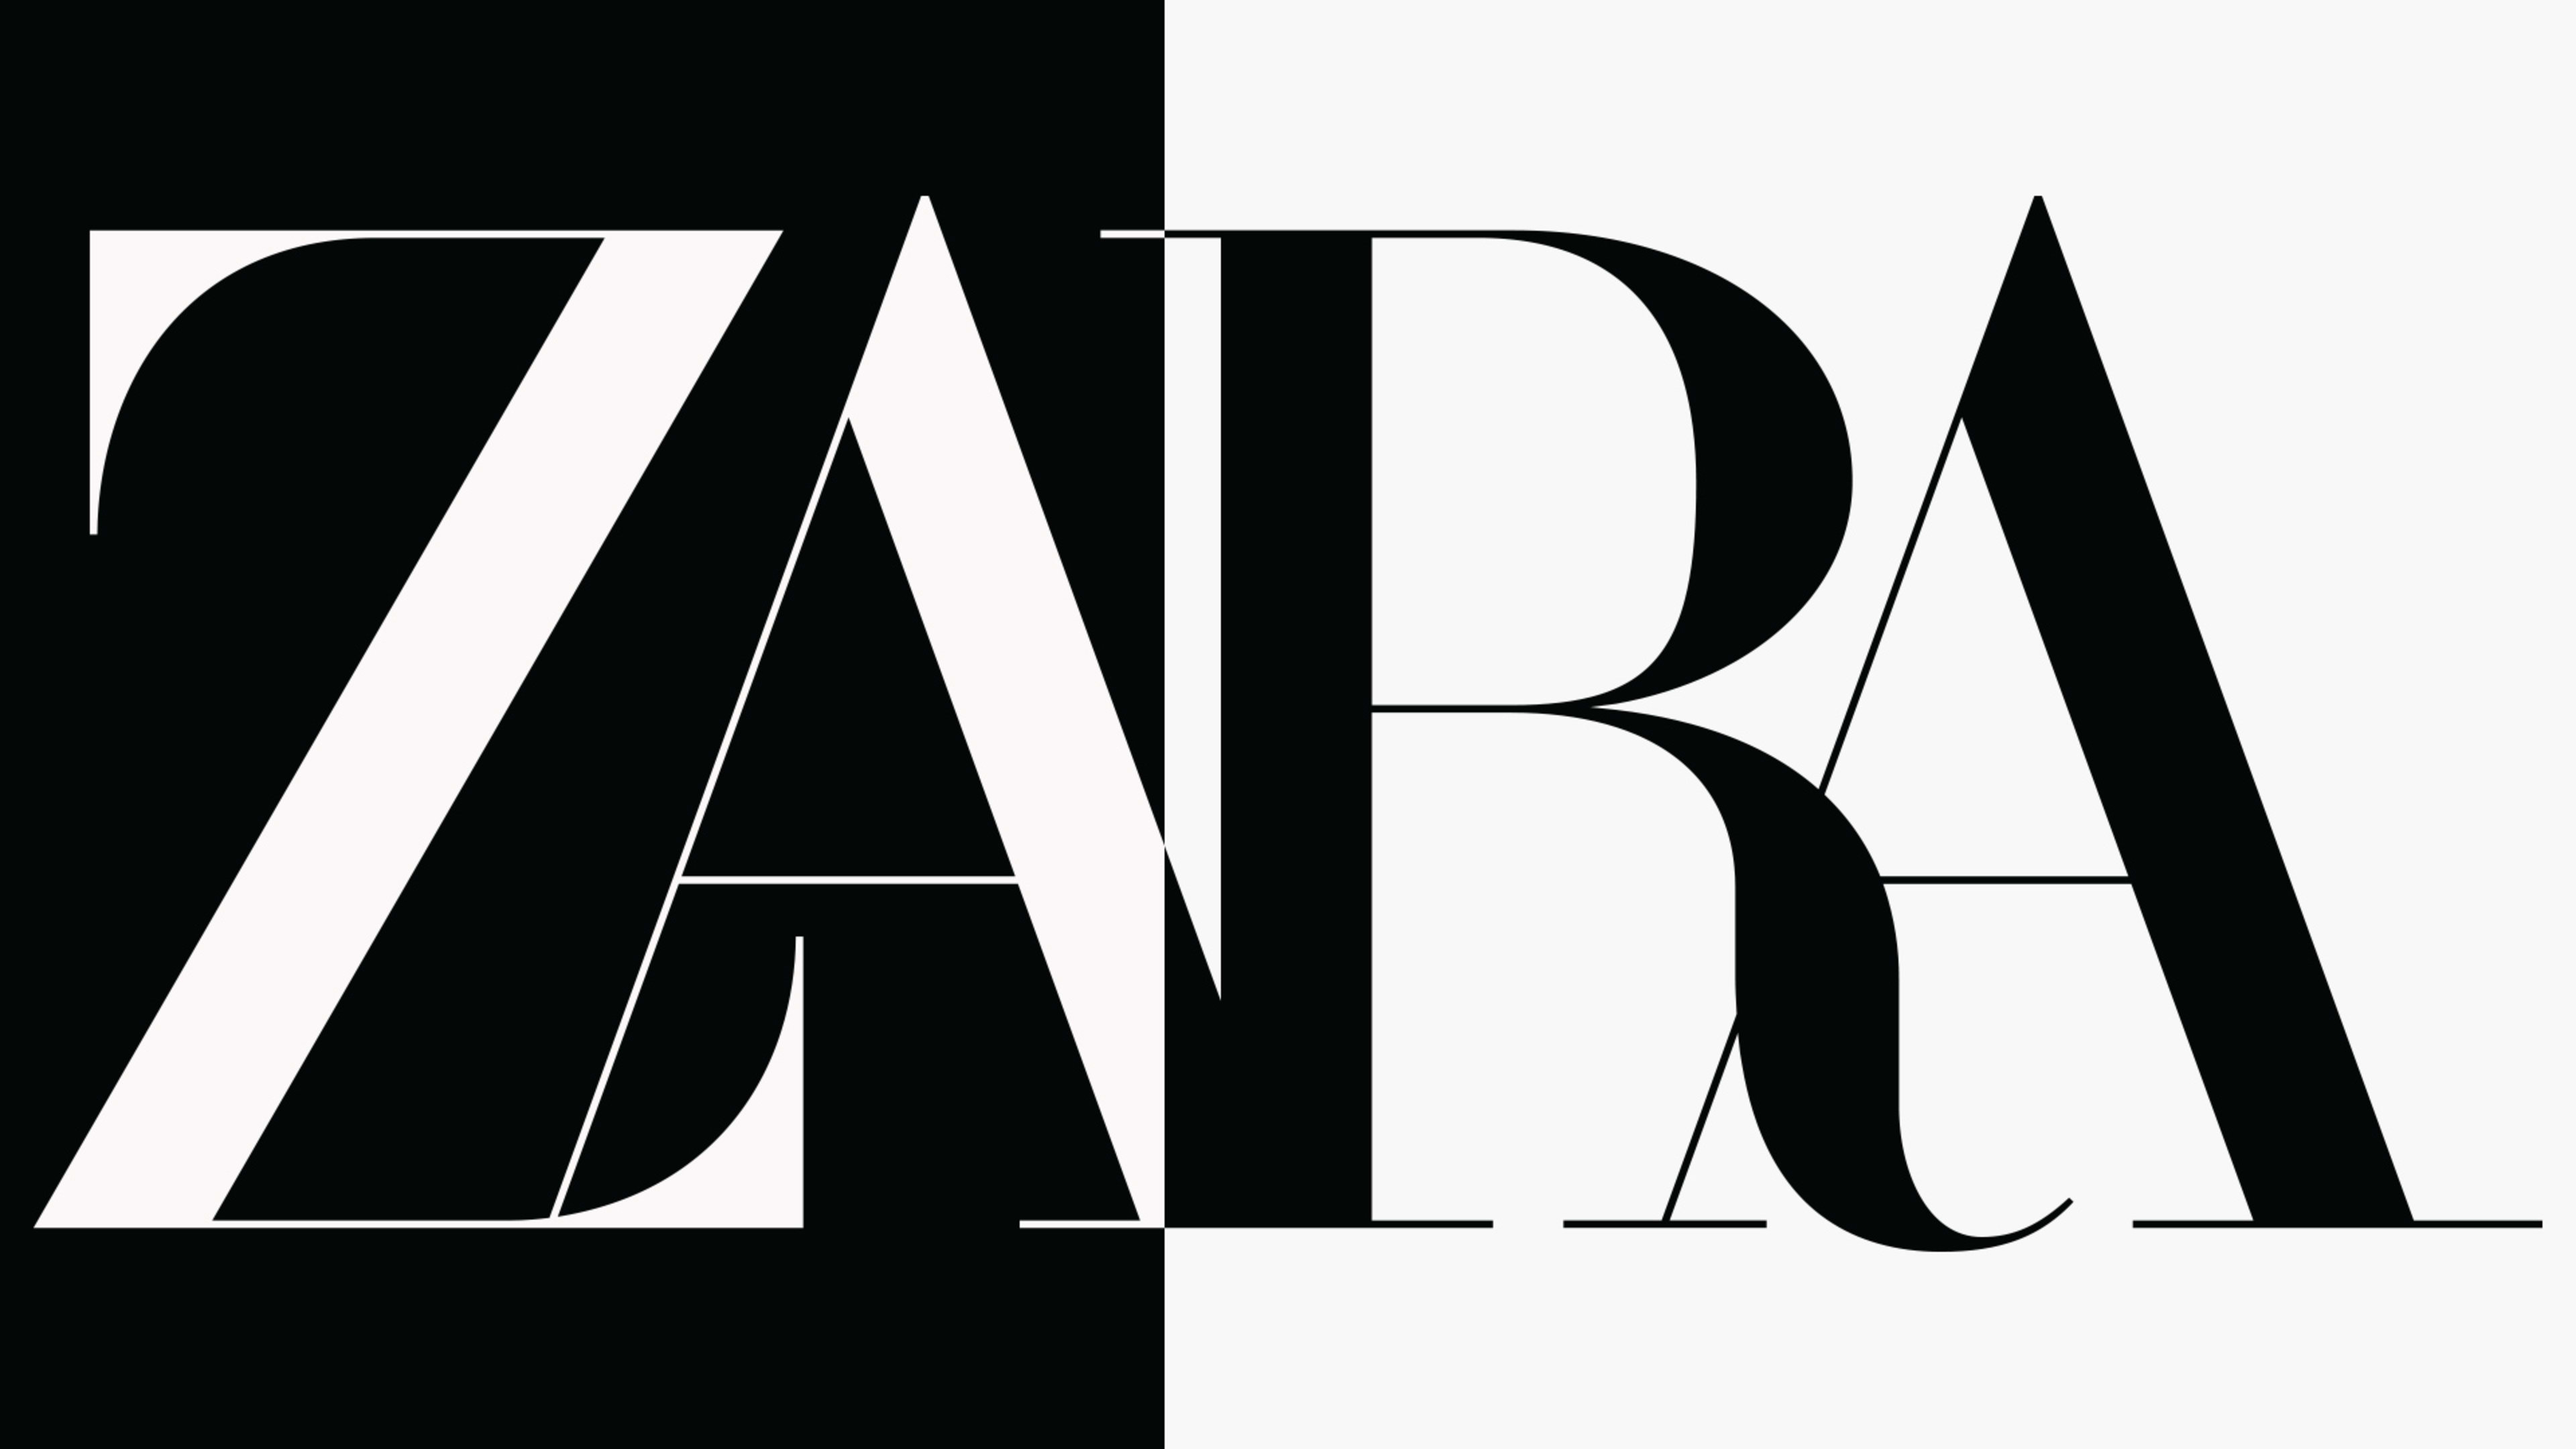 Zara’s new logo may be the future of branding, love it or hate it